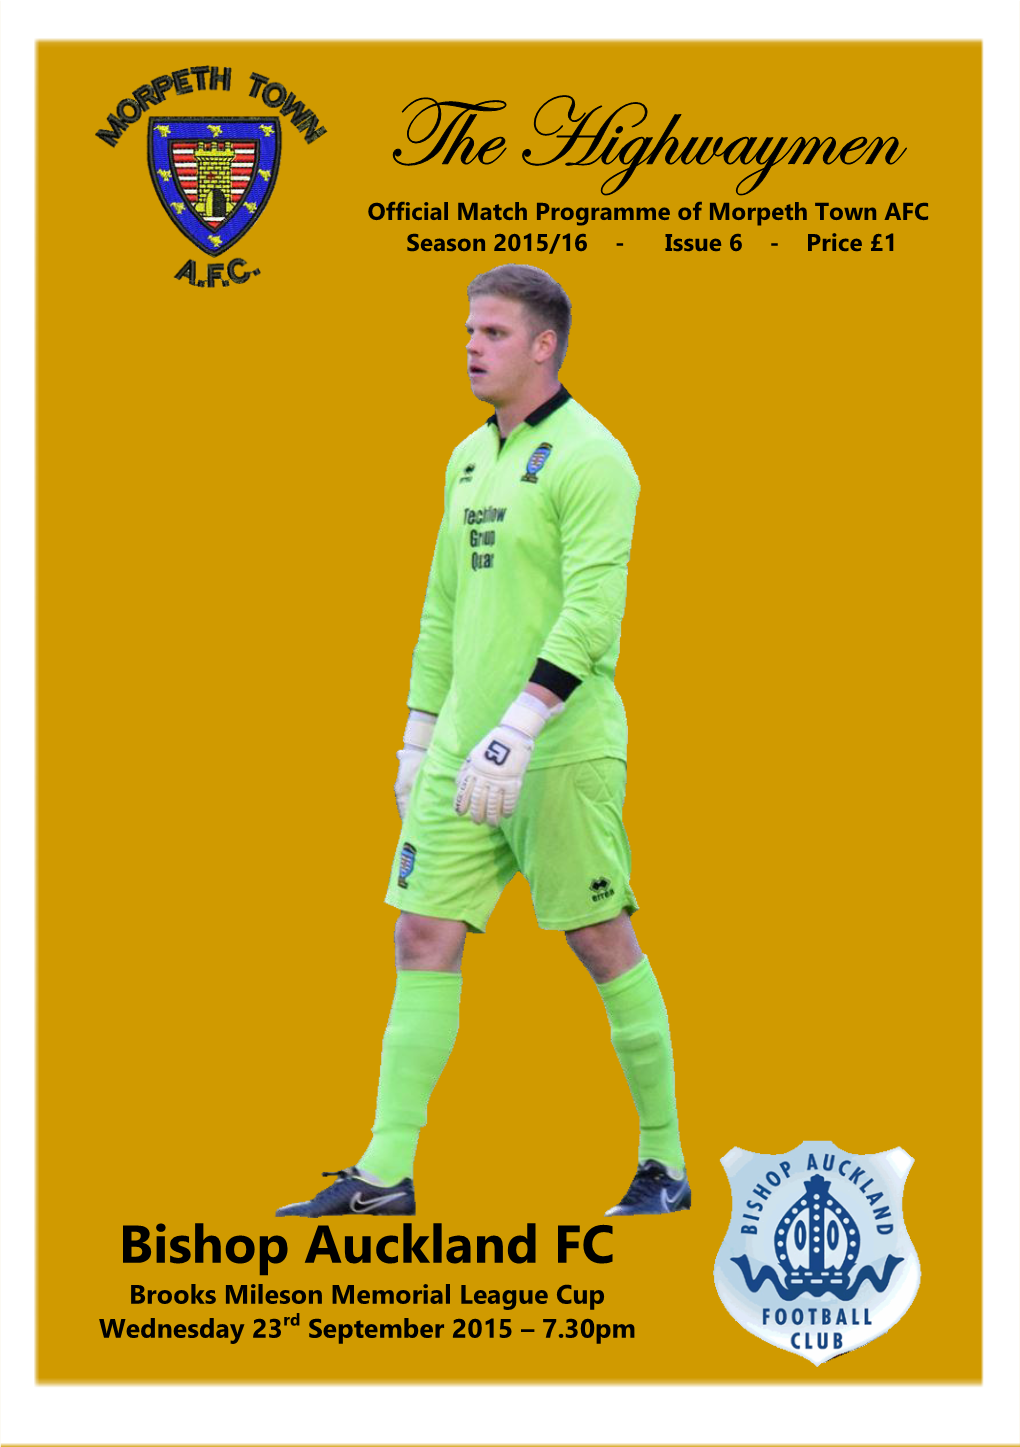 The Highwaymen Official Match Programme of Morpeth Town AFC Season 2015/16 - Issue 6 - Price £1